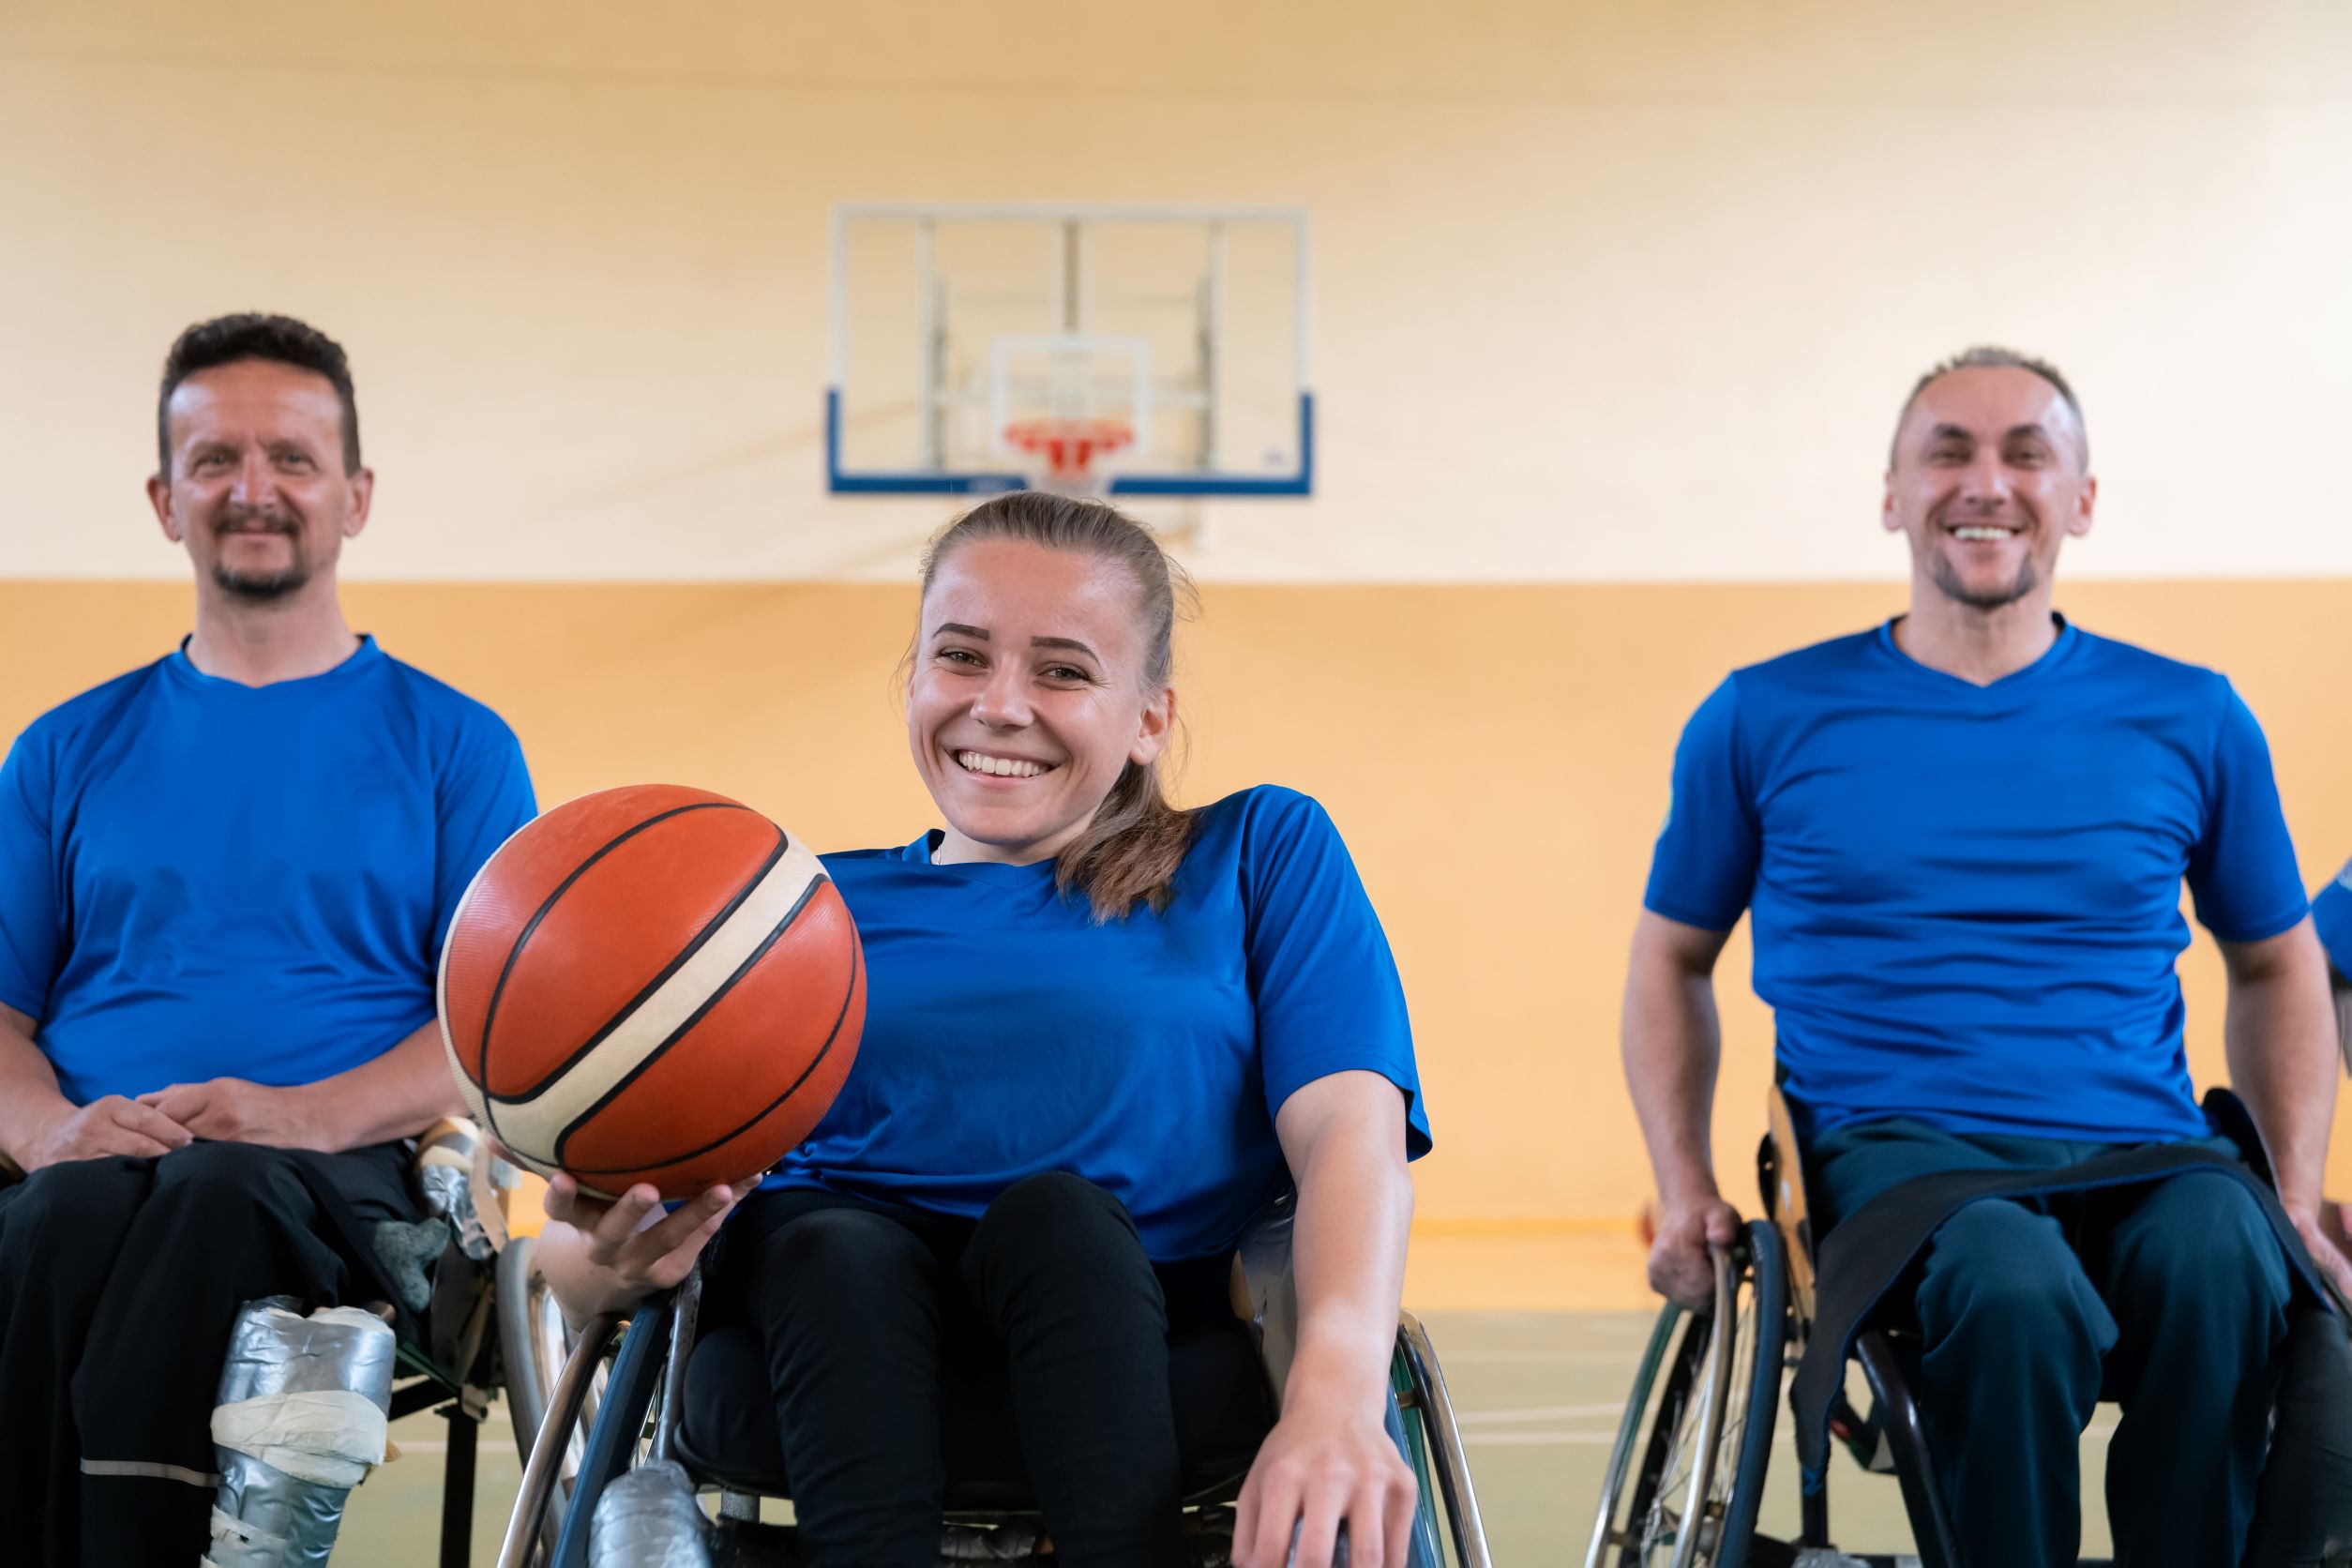 Wheelchair basketball players posing for a picture